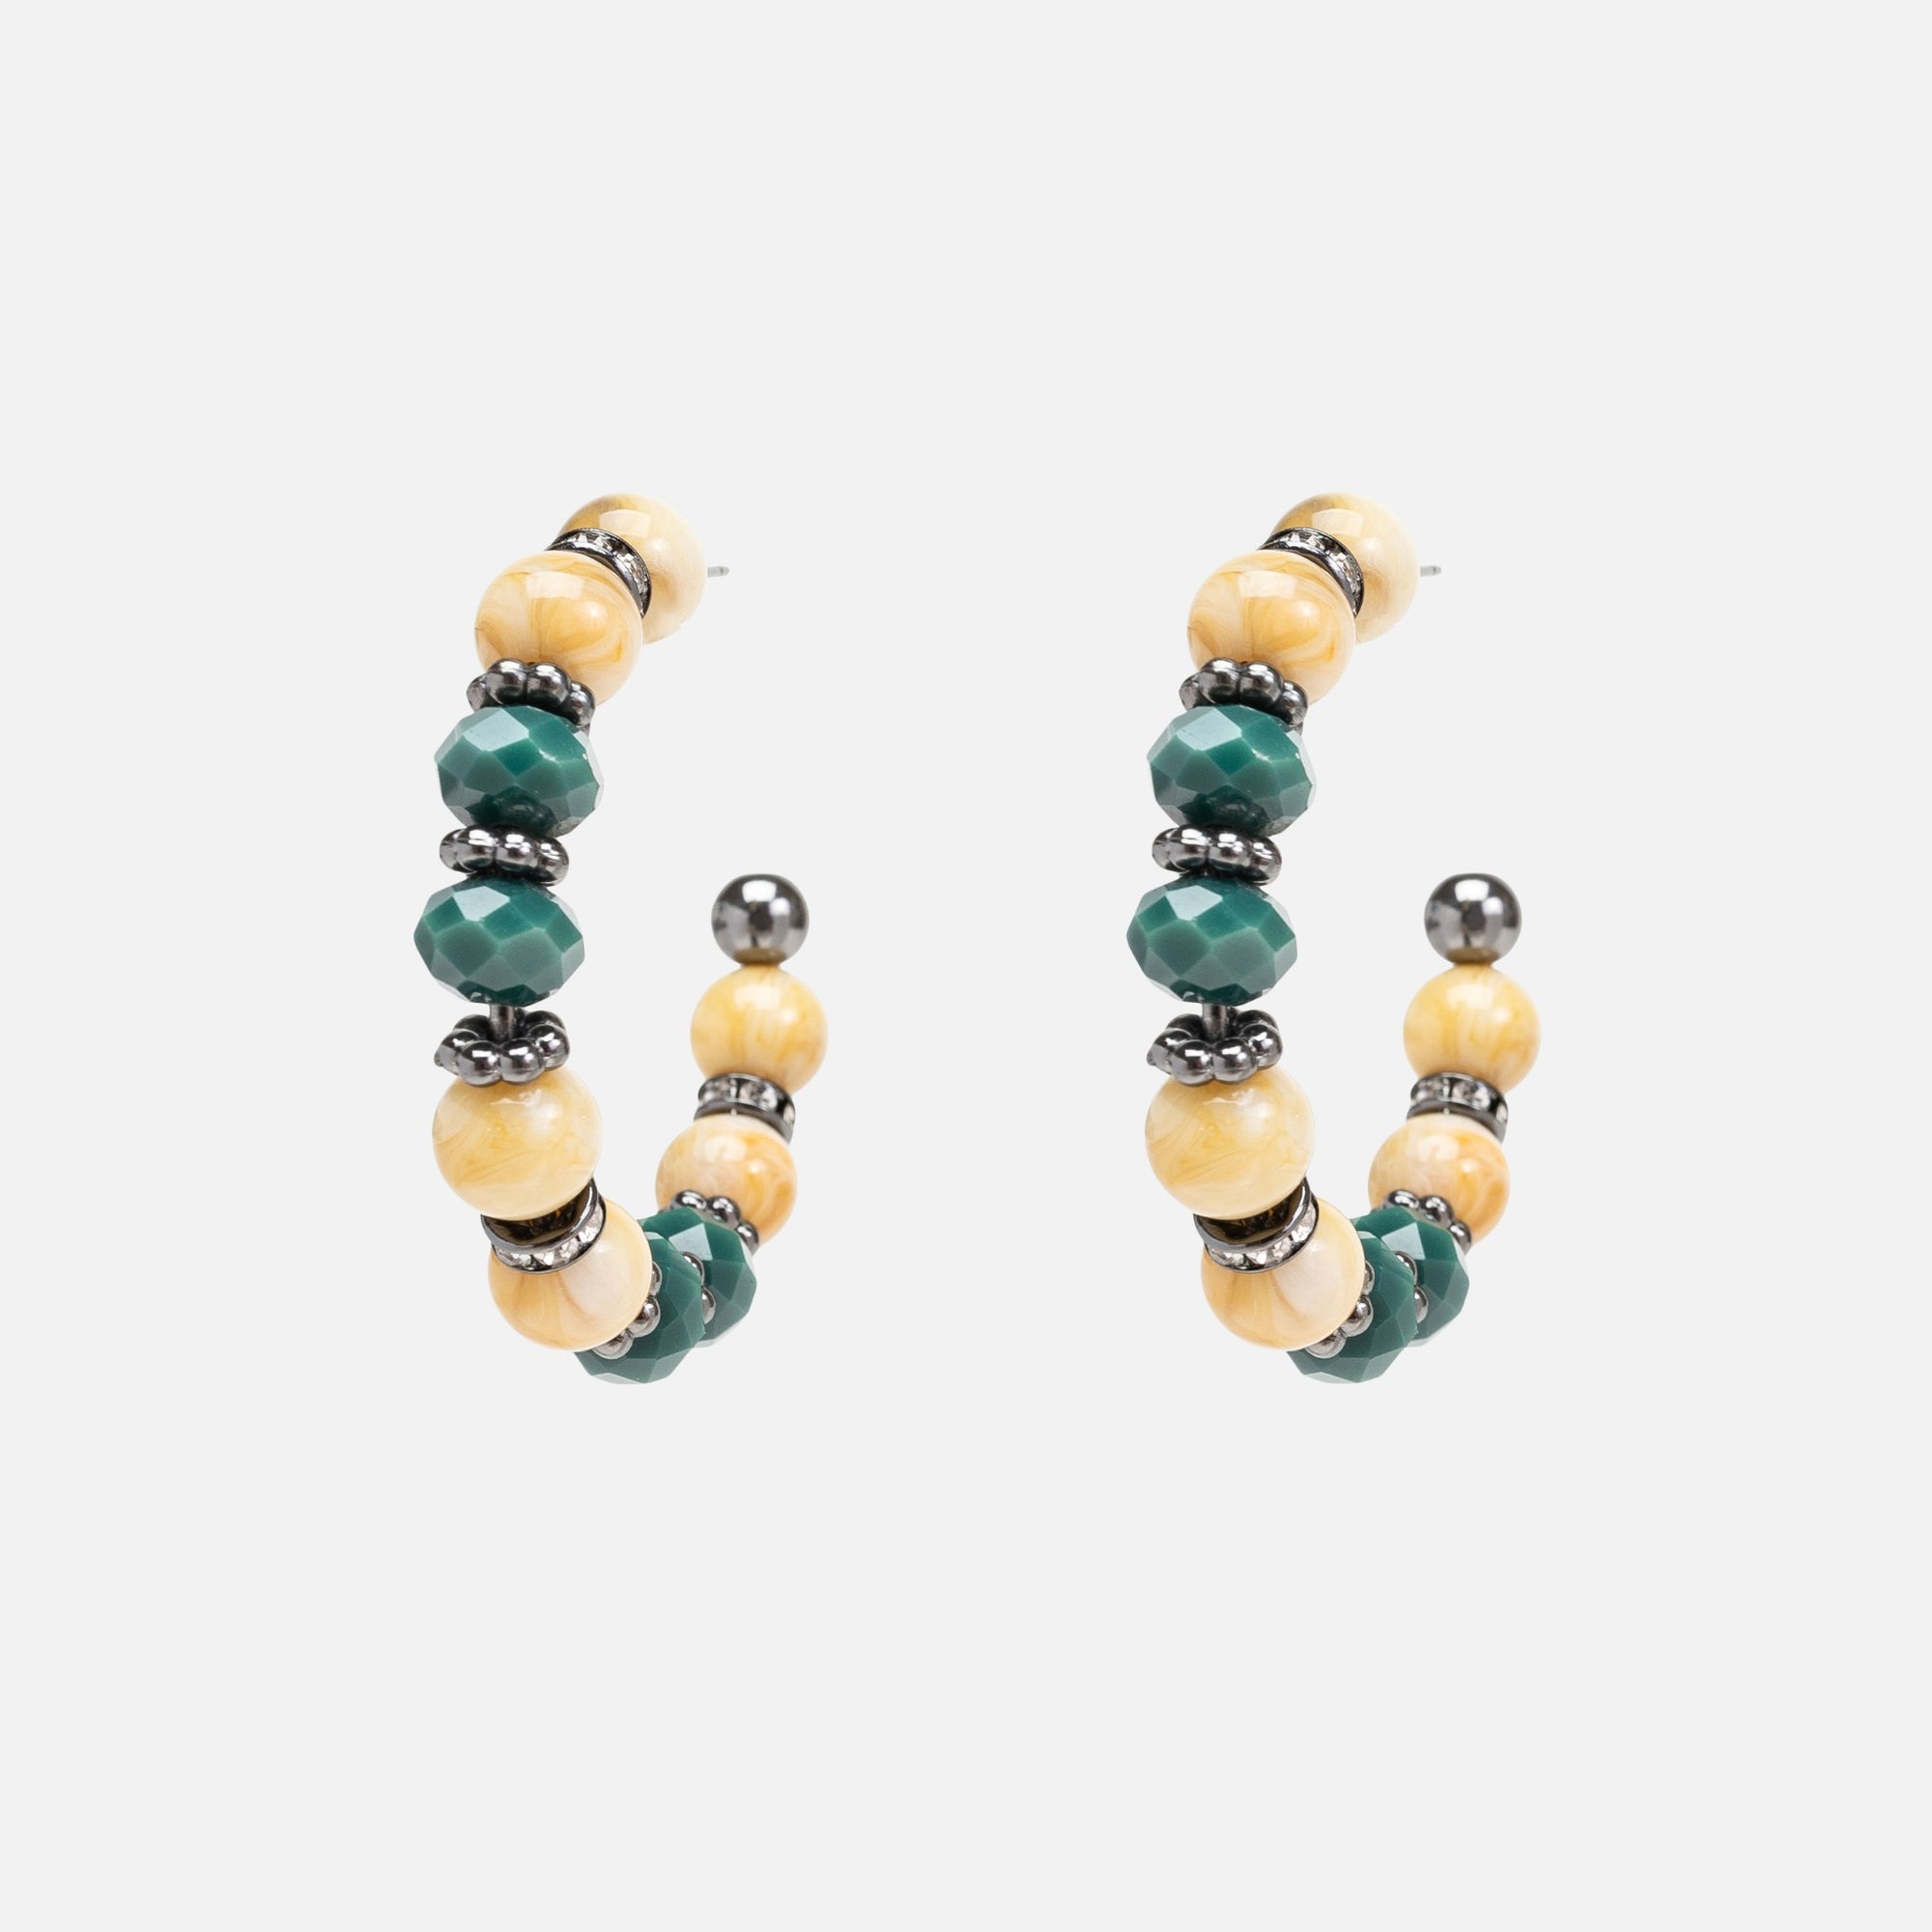 Wood hoop earrings with green and grey beads